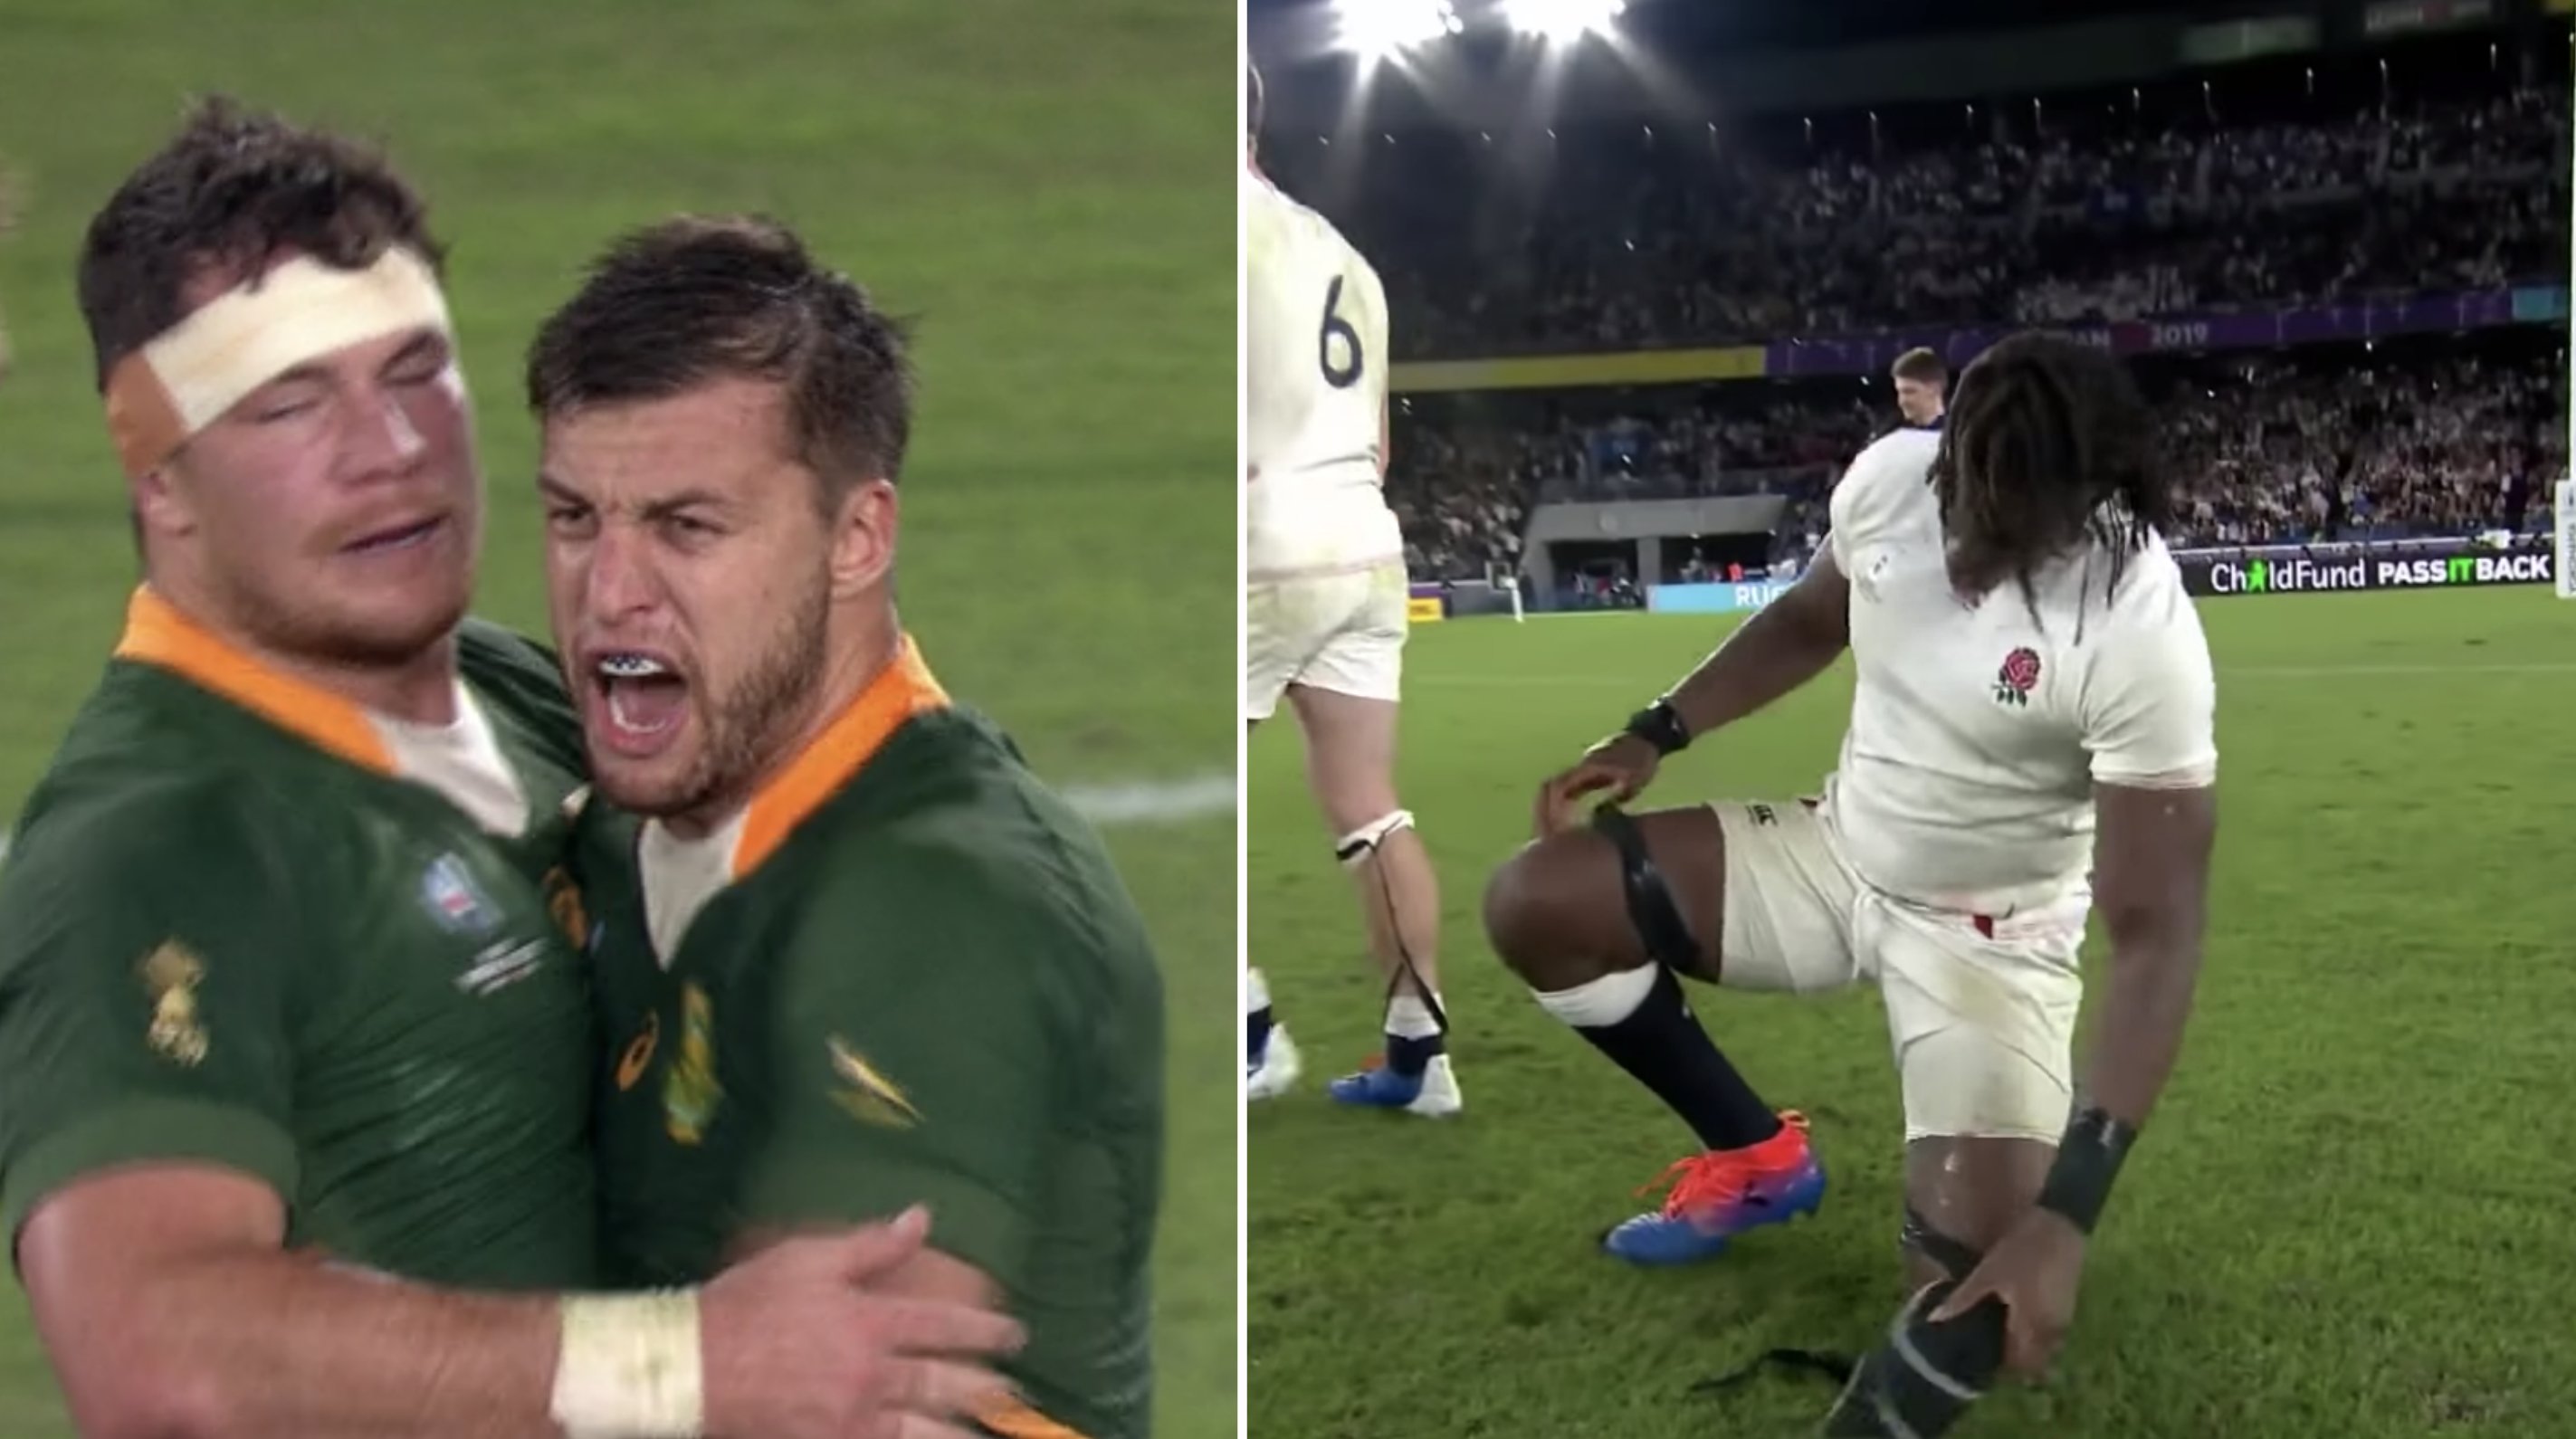 England and South Africa responses on final whistle speaks volumes about mentality ahead of final